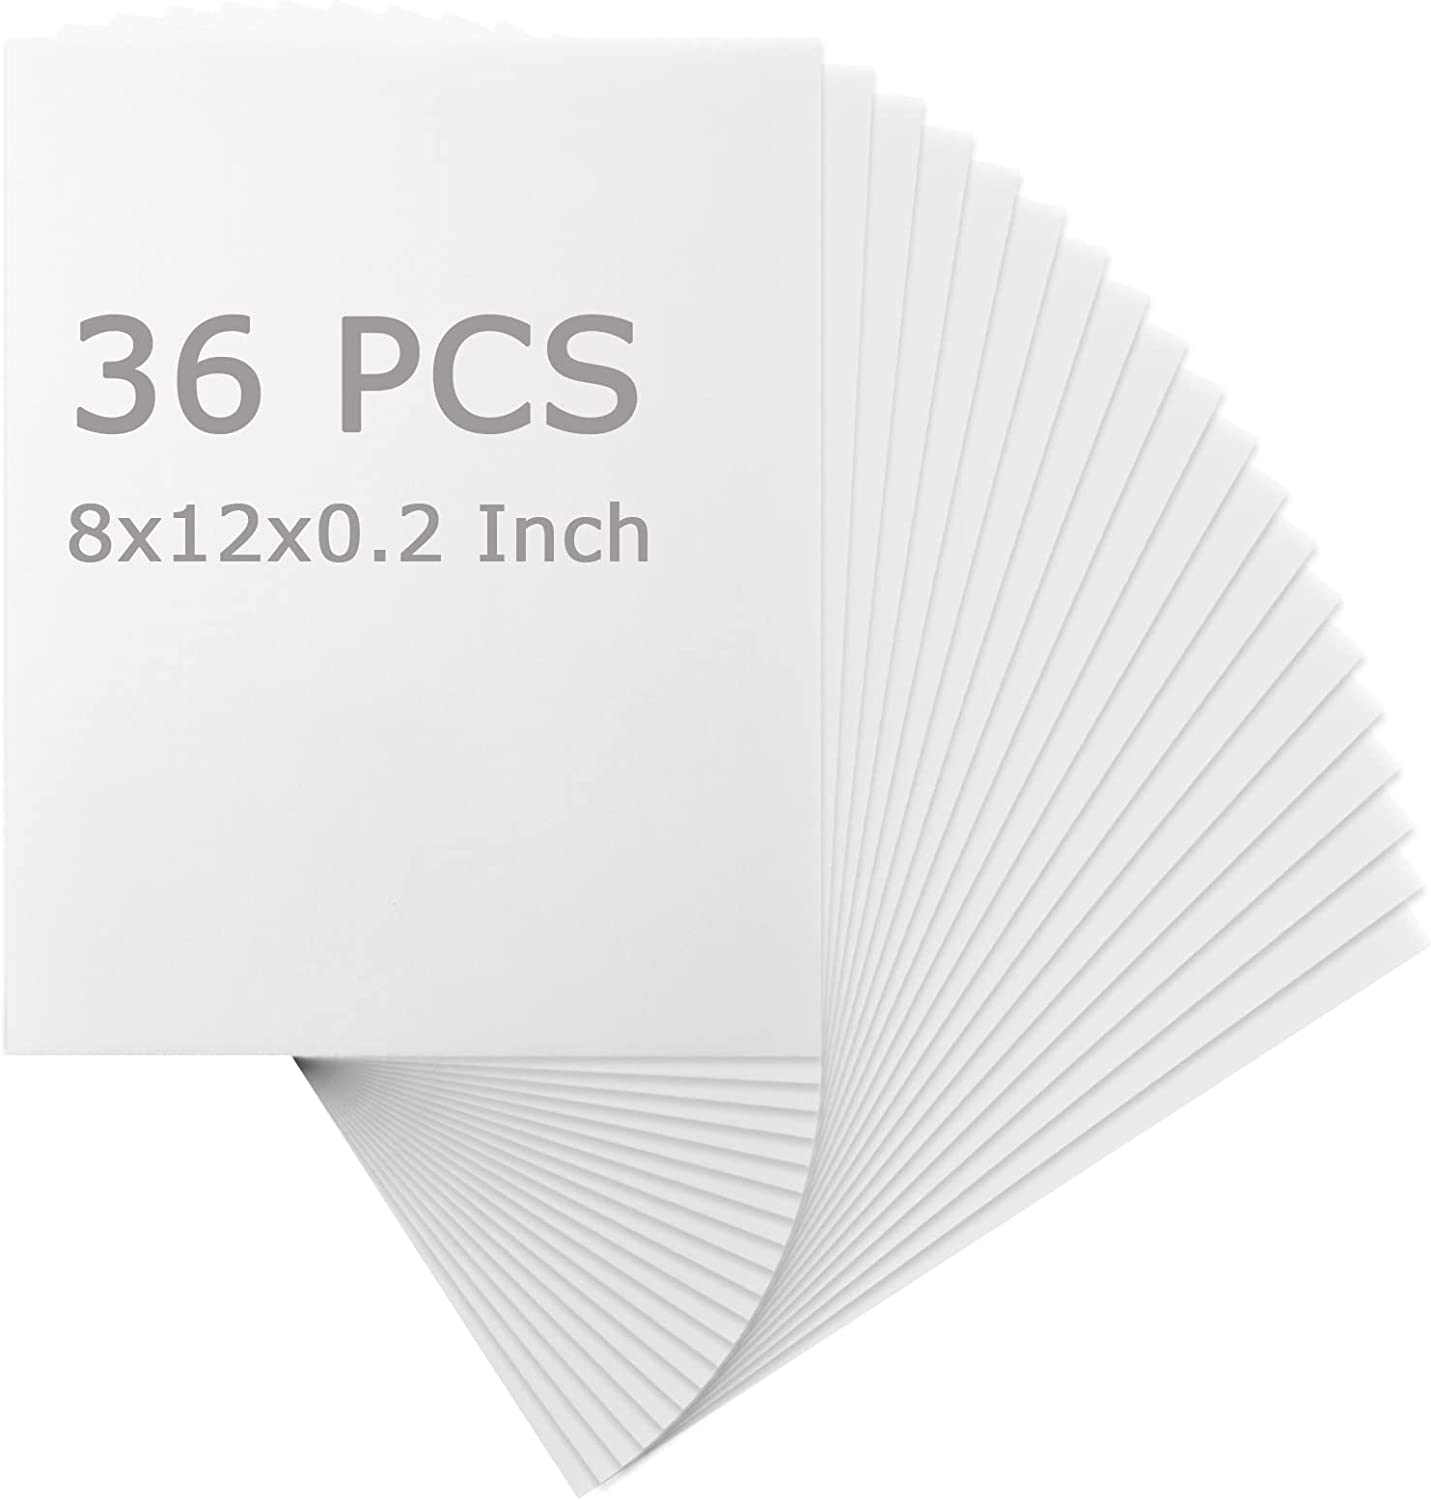 Foam Core Backing Board 3/16 White 20x30- 50 Pack. Many Sizes Available.  Acid Free Buffered Craft Poster Board for Signs, Presentations, School,  Office and Art Projects 